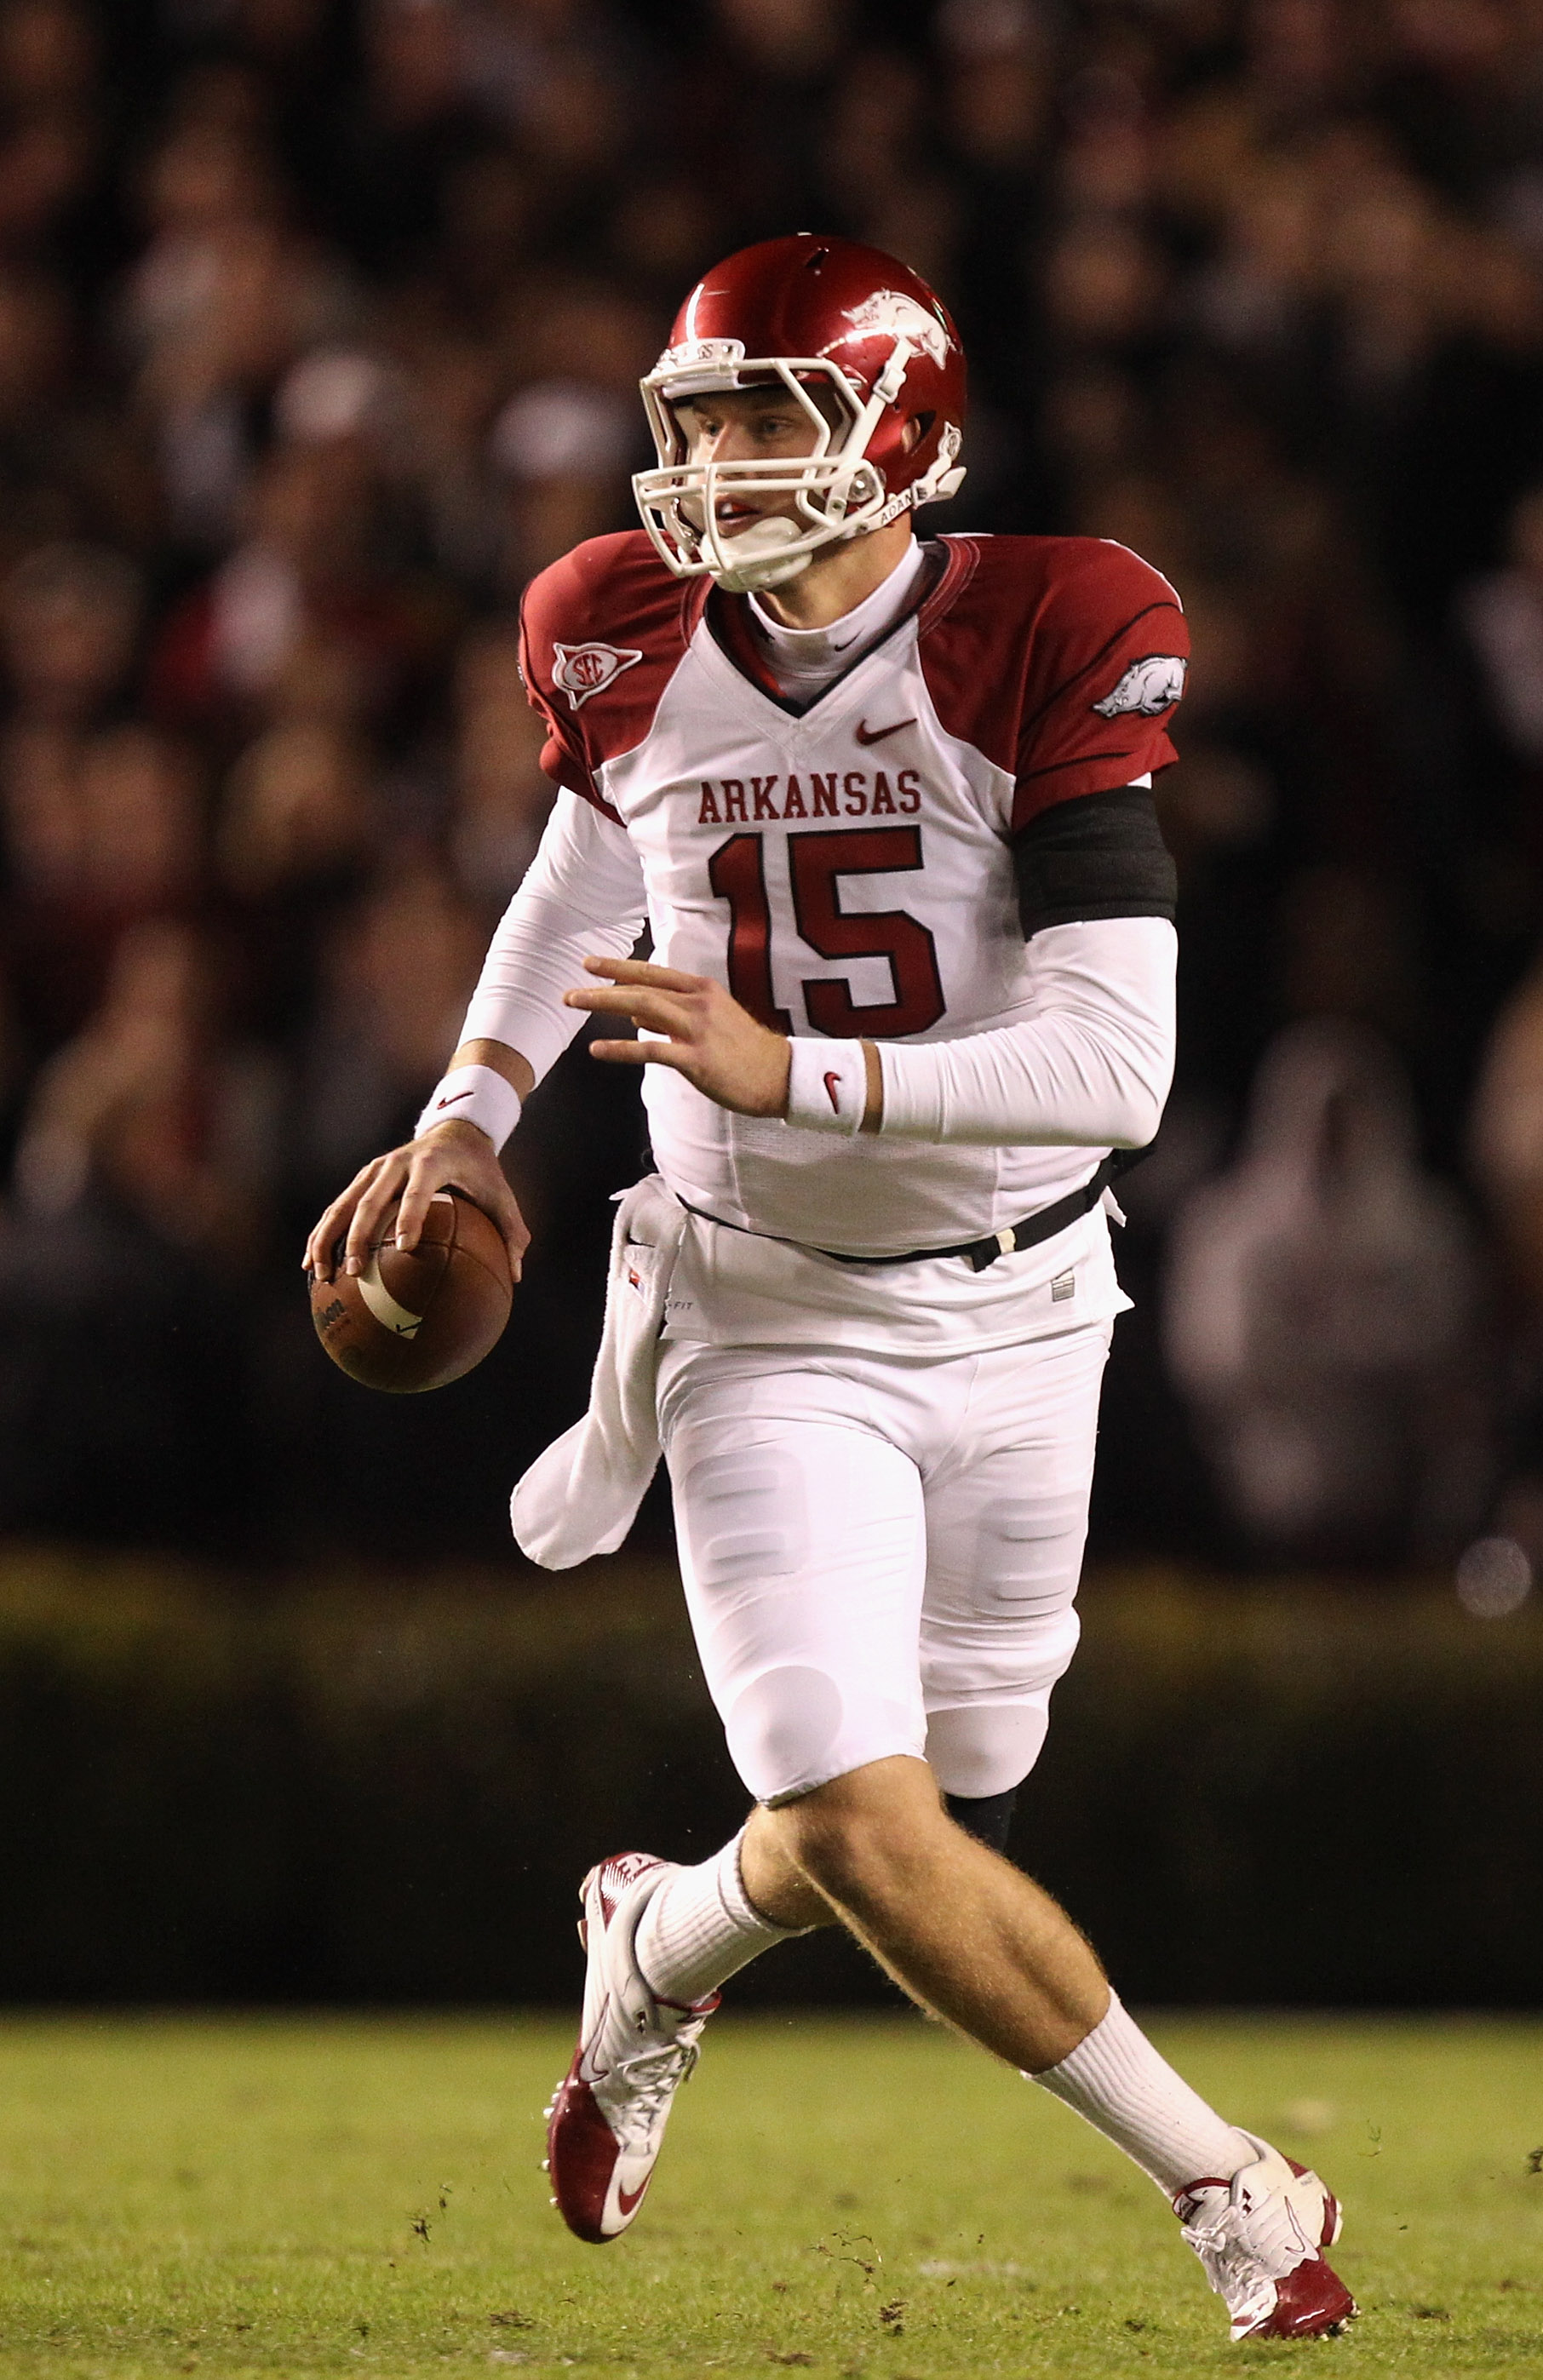 COLUMBIA, SC - NOVEMBER 06:  Ryan Mallett #15 of the Arkansas Razorbacks looks to pass against the South Carolina Gamecocks during their game at Williams-Brice Stadium on November 6, 2010 in Columbia, South Carolina.  (Photo by Streeter Lecka/Getty Images